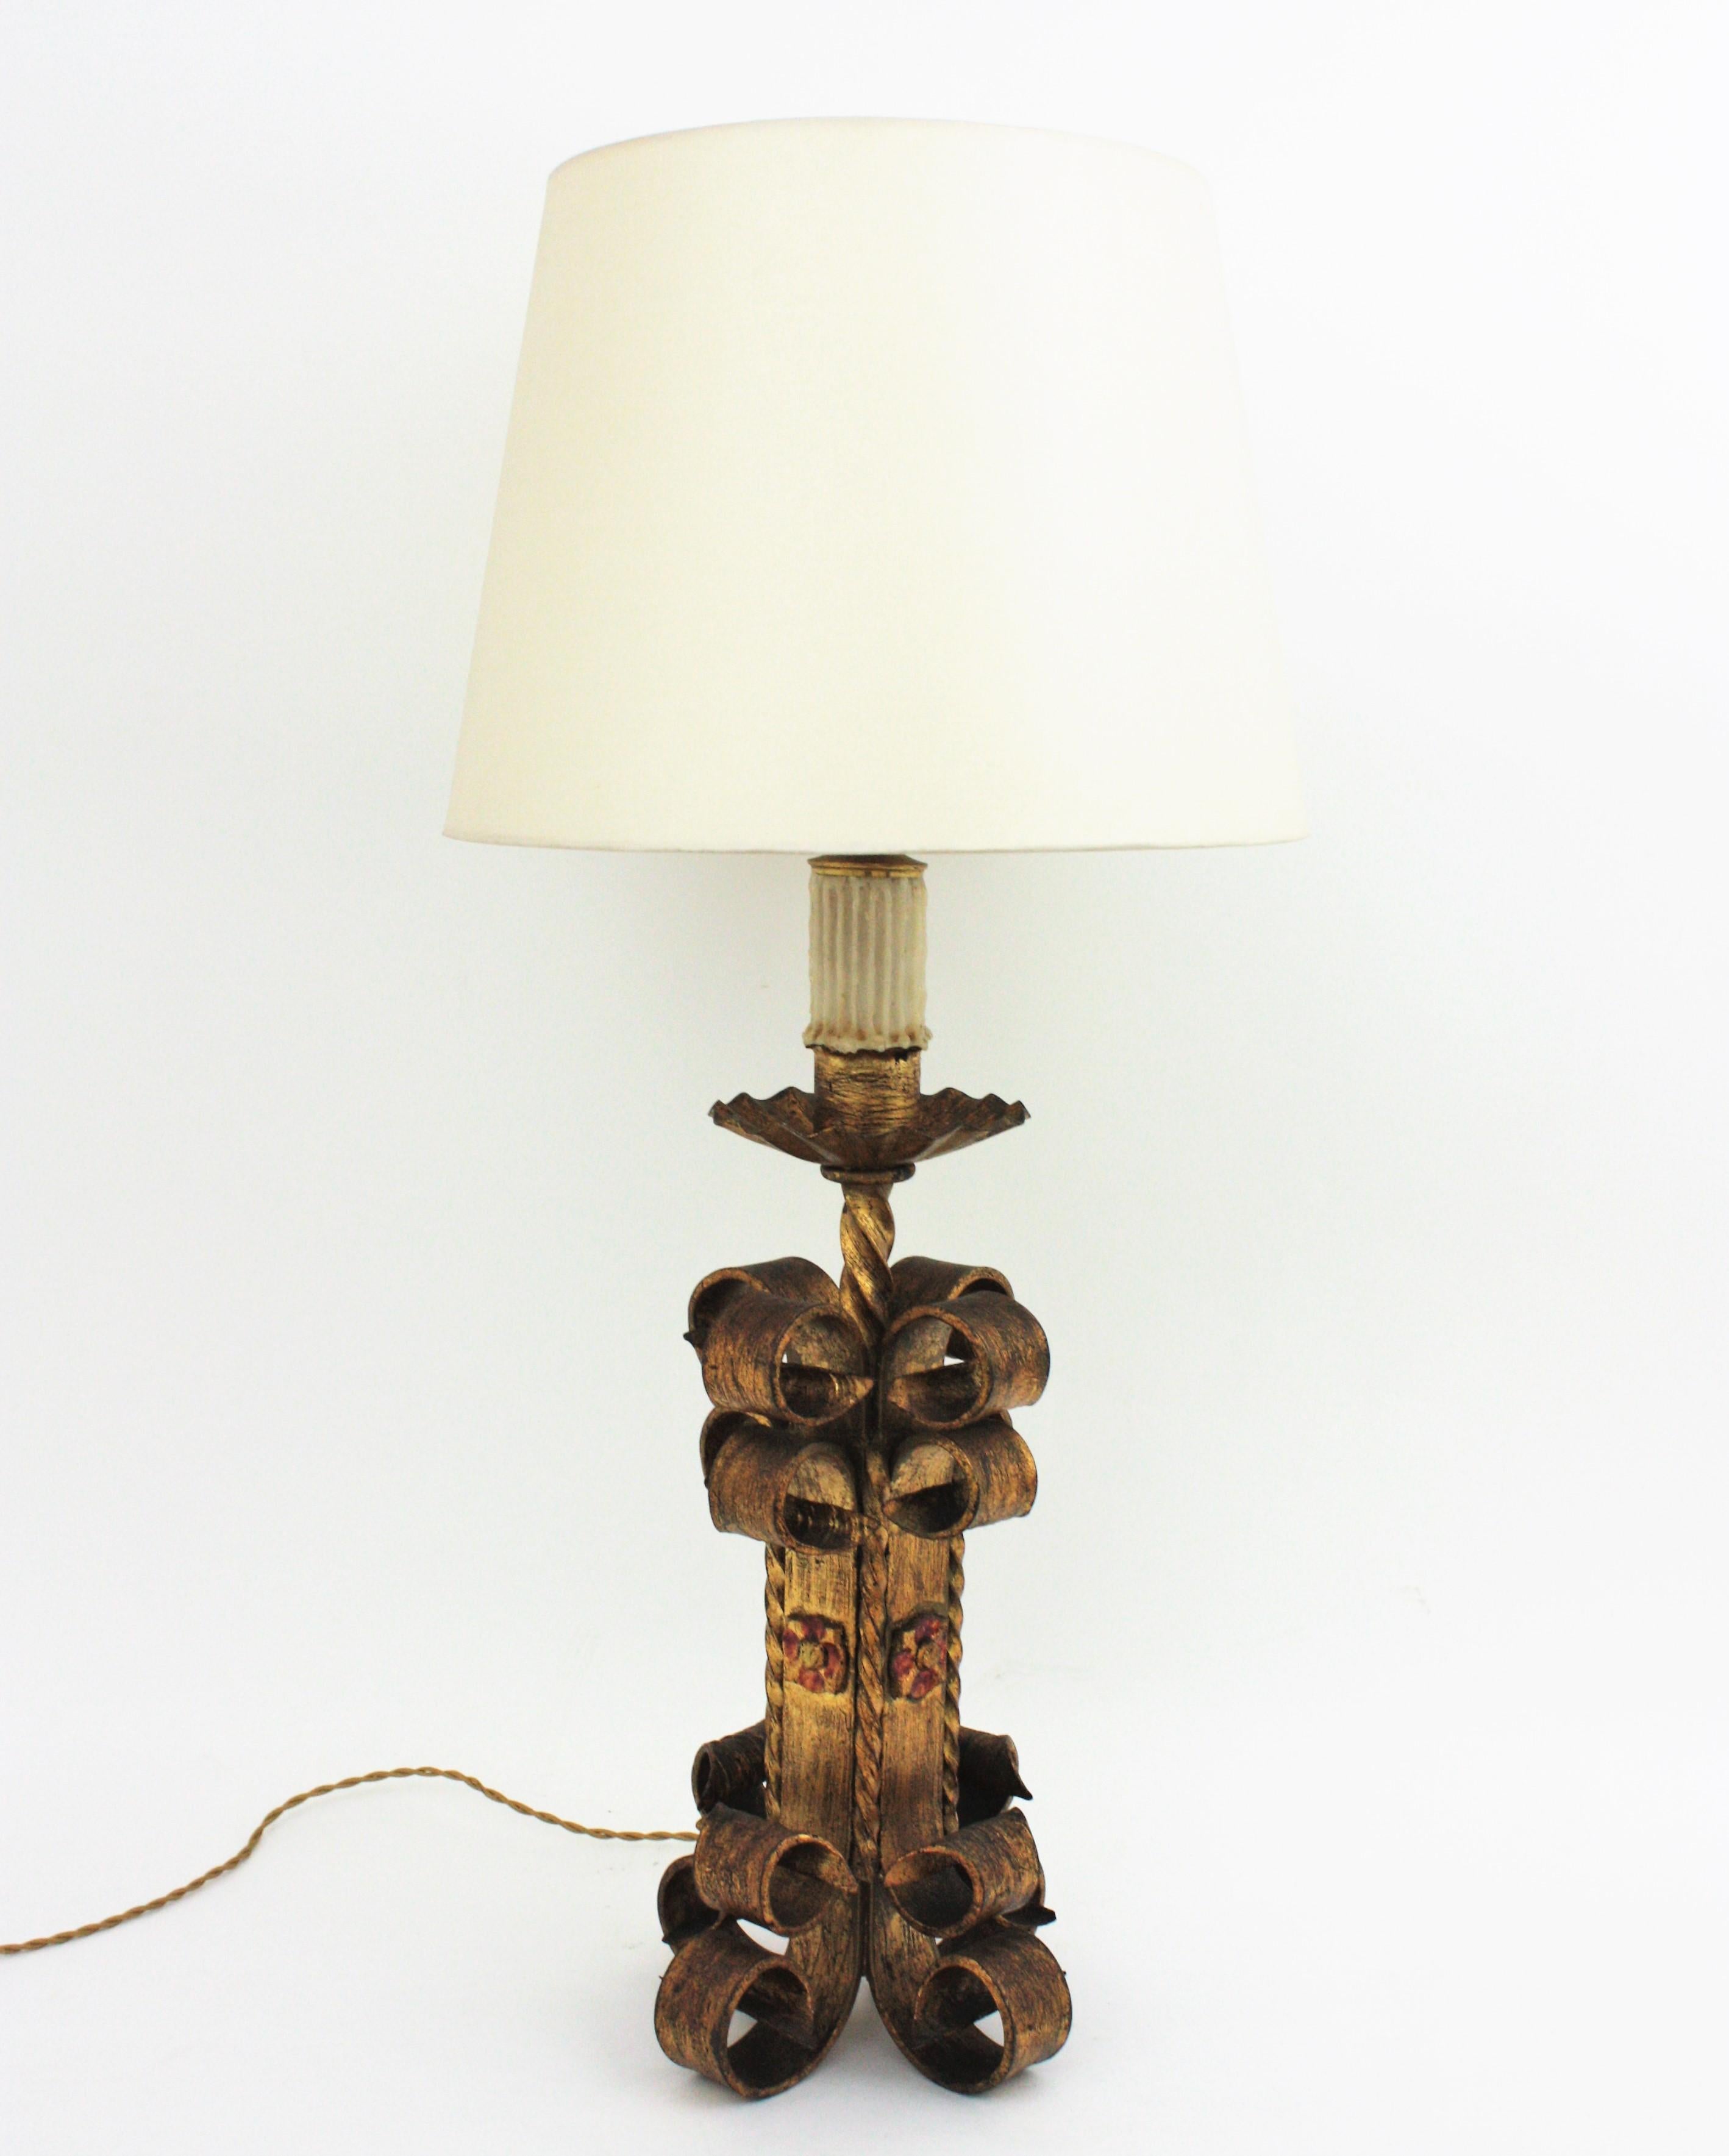 Spanish Revival Scrollwork Table Lamp in Gilt Wrought Iron, 1940s For Sale 1